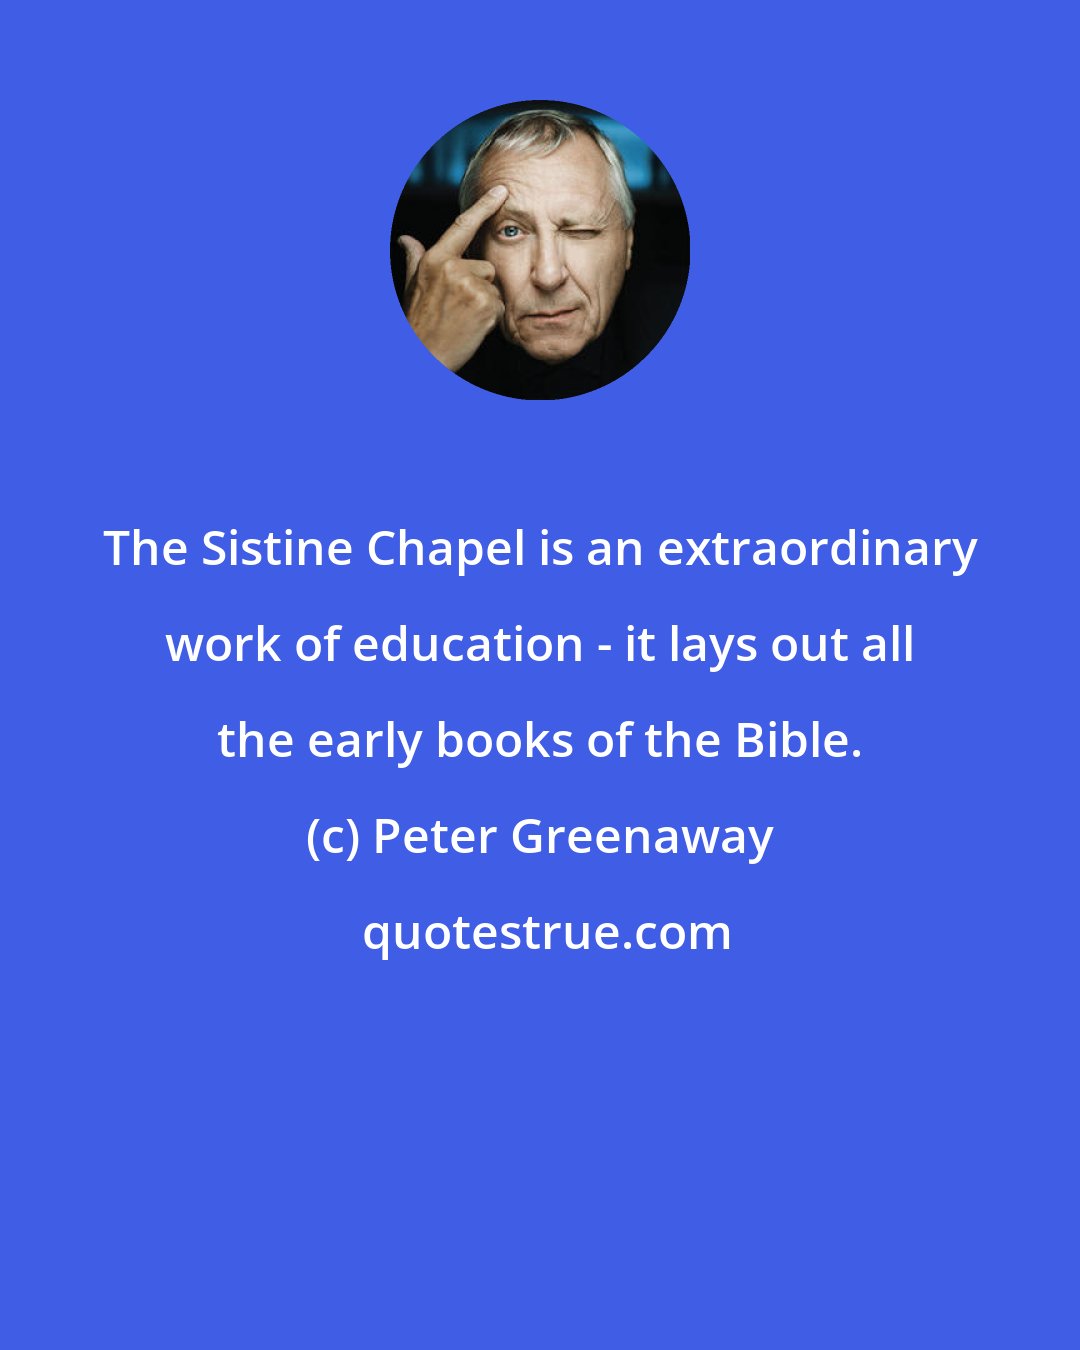 Peter Greenaway: The Sistine Chapel is an extraordinary work of education - it lays out all the early books of the Bible.